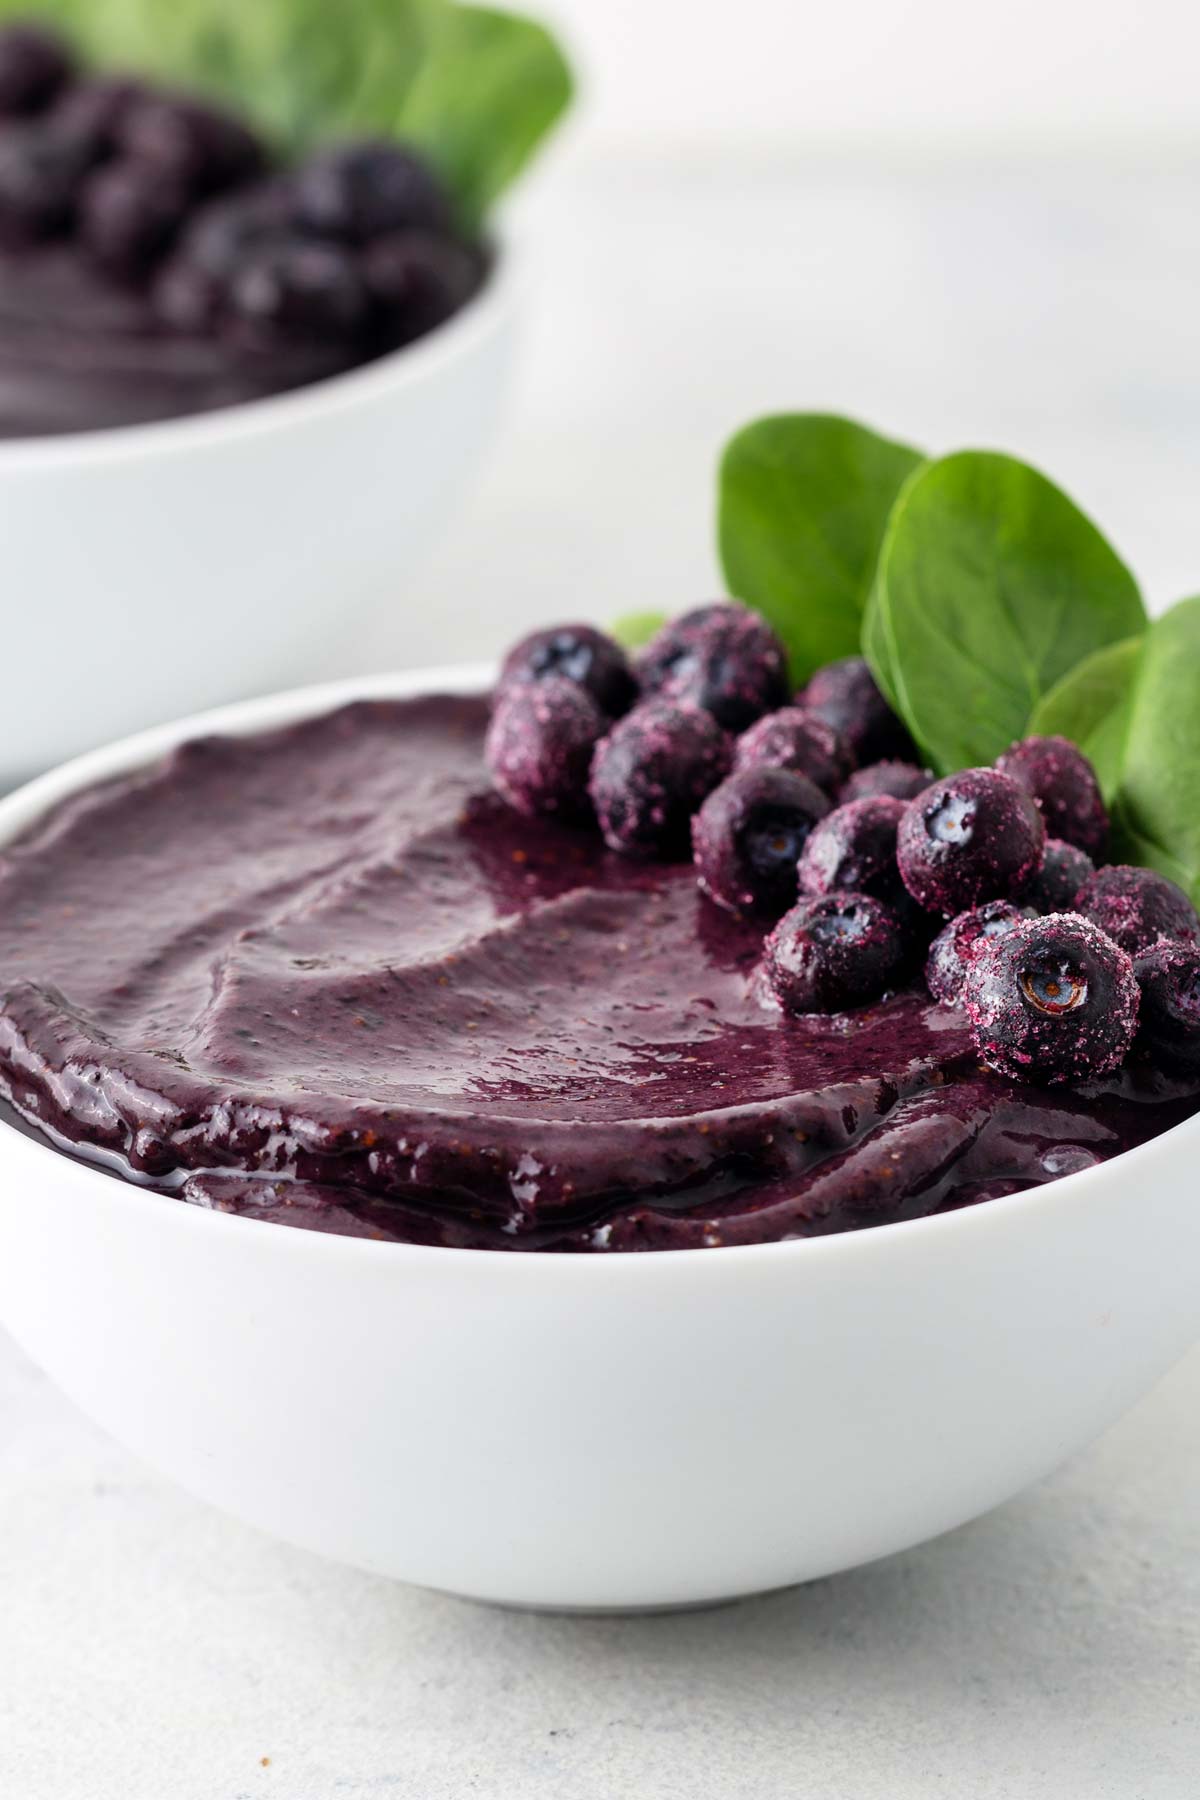 Blueberry smoothie bowl on a gray table.